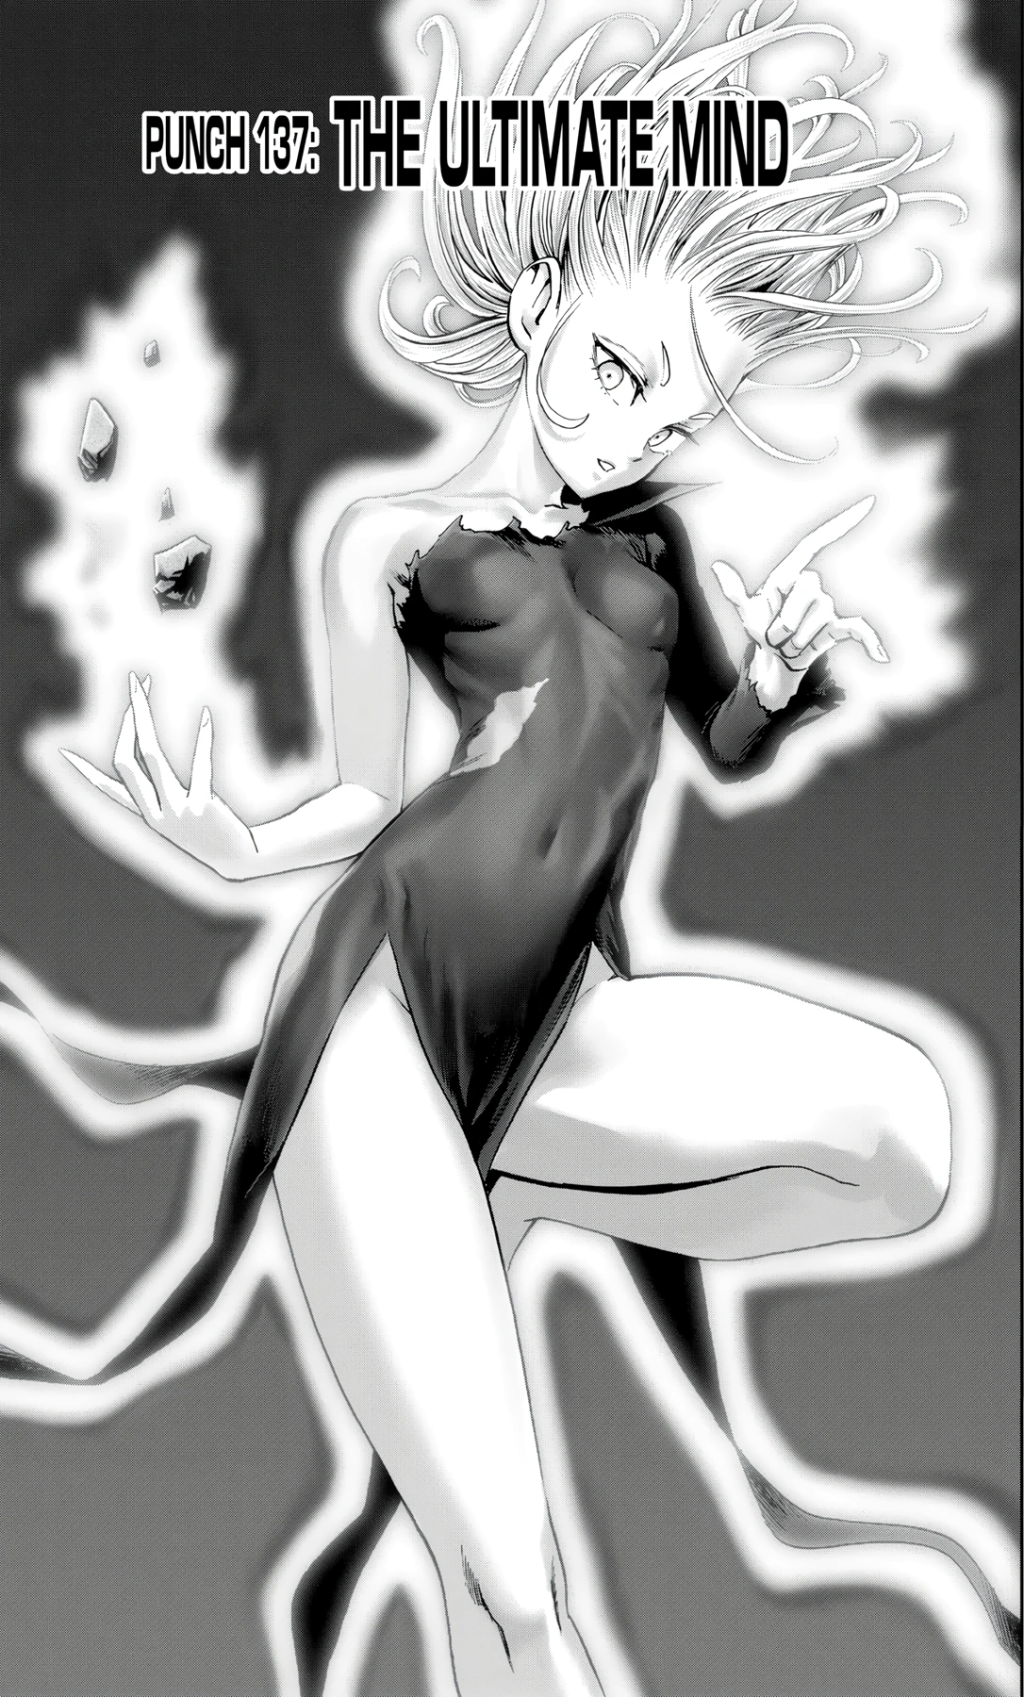 Tatsumaki prepares to take on the fused Psykos-Orochi on Yusuke Murata's cover page to One-Punch Man Chapter 133 "The Ultimate Mind!" (2020), Shueisha